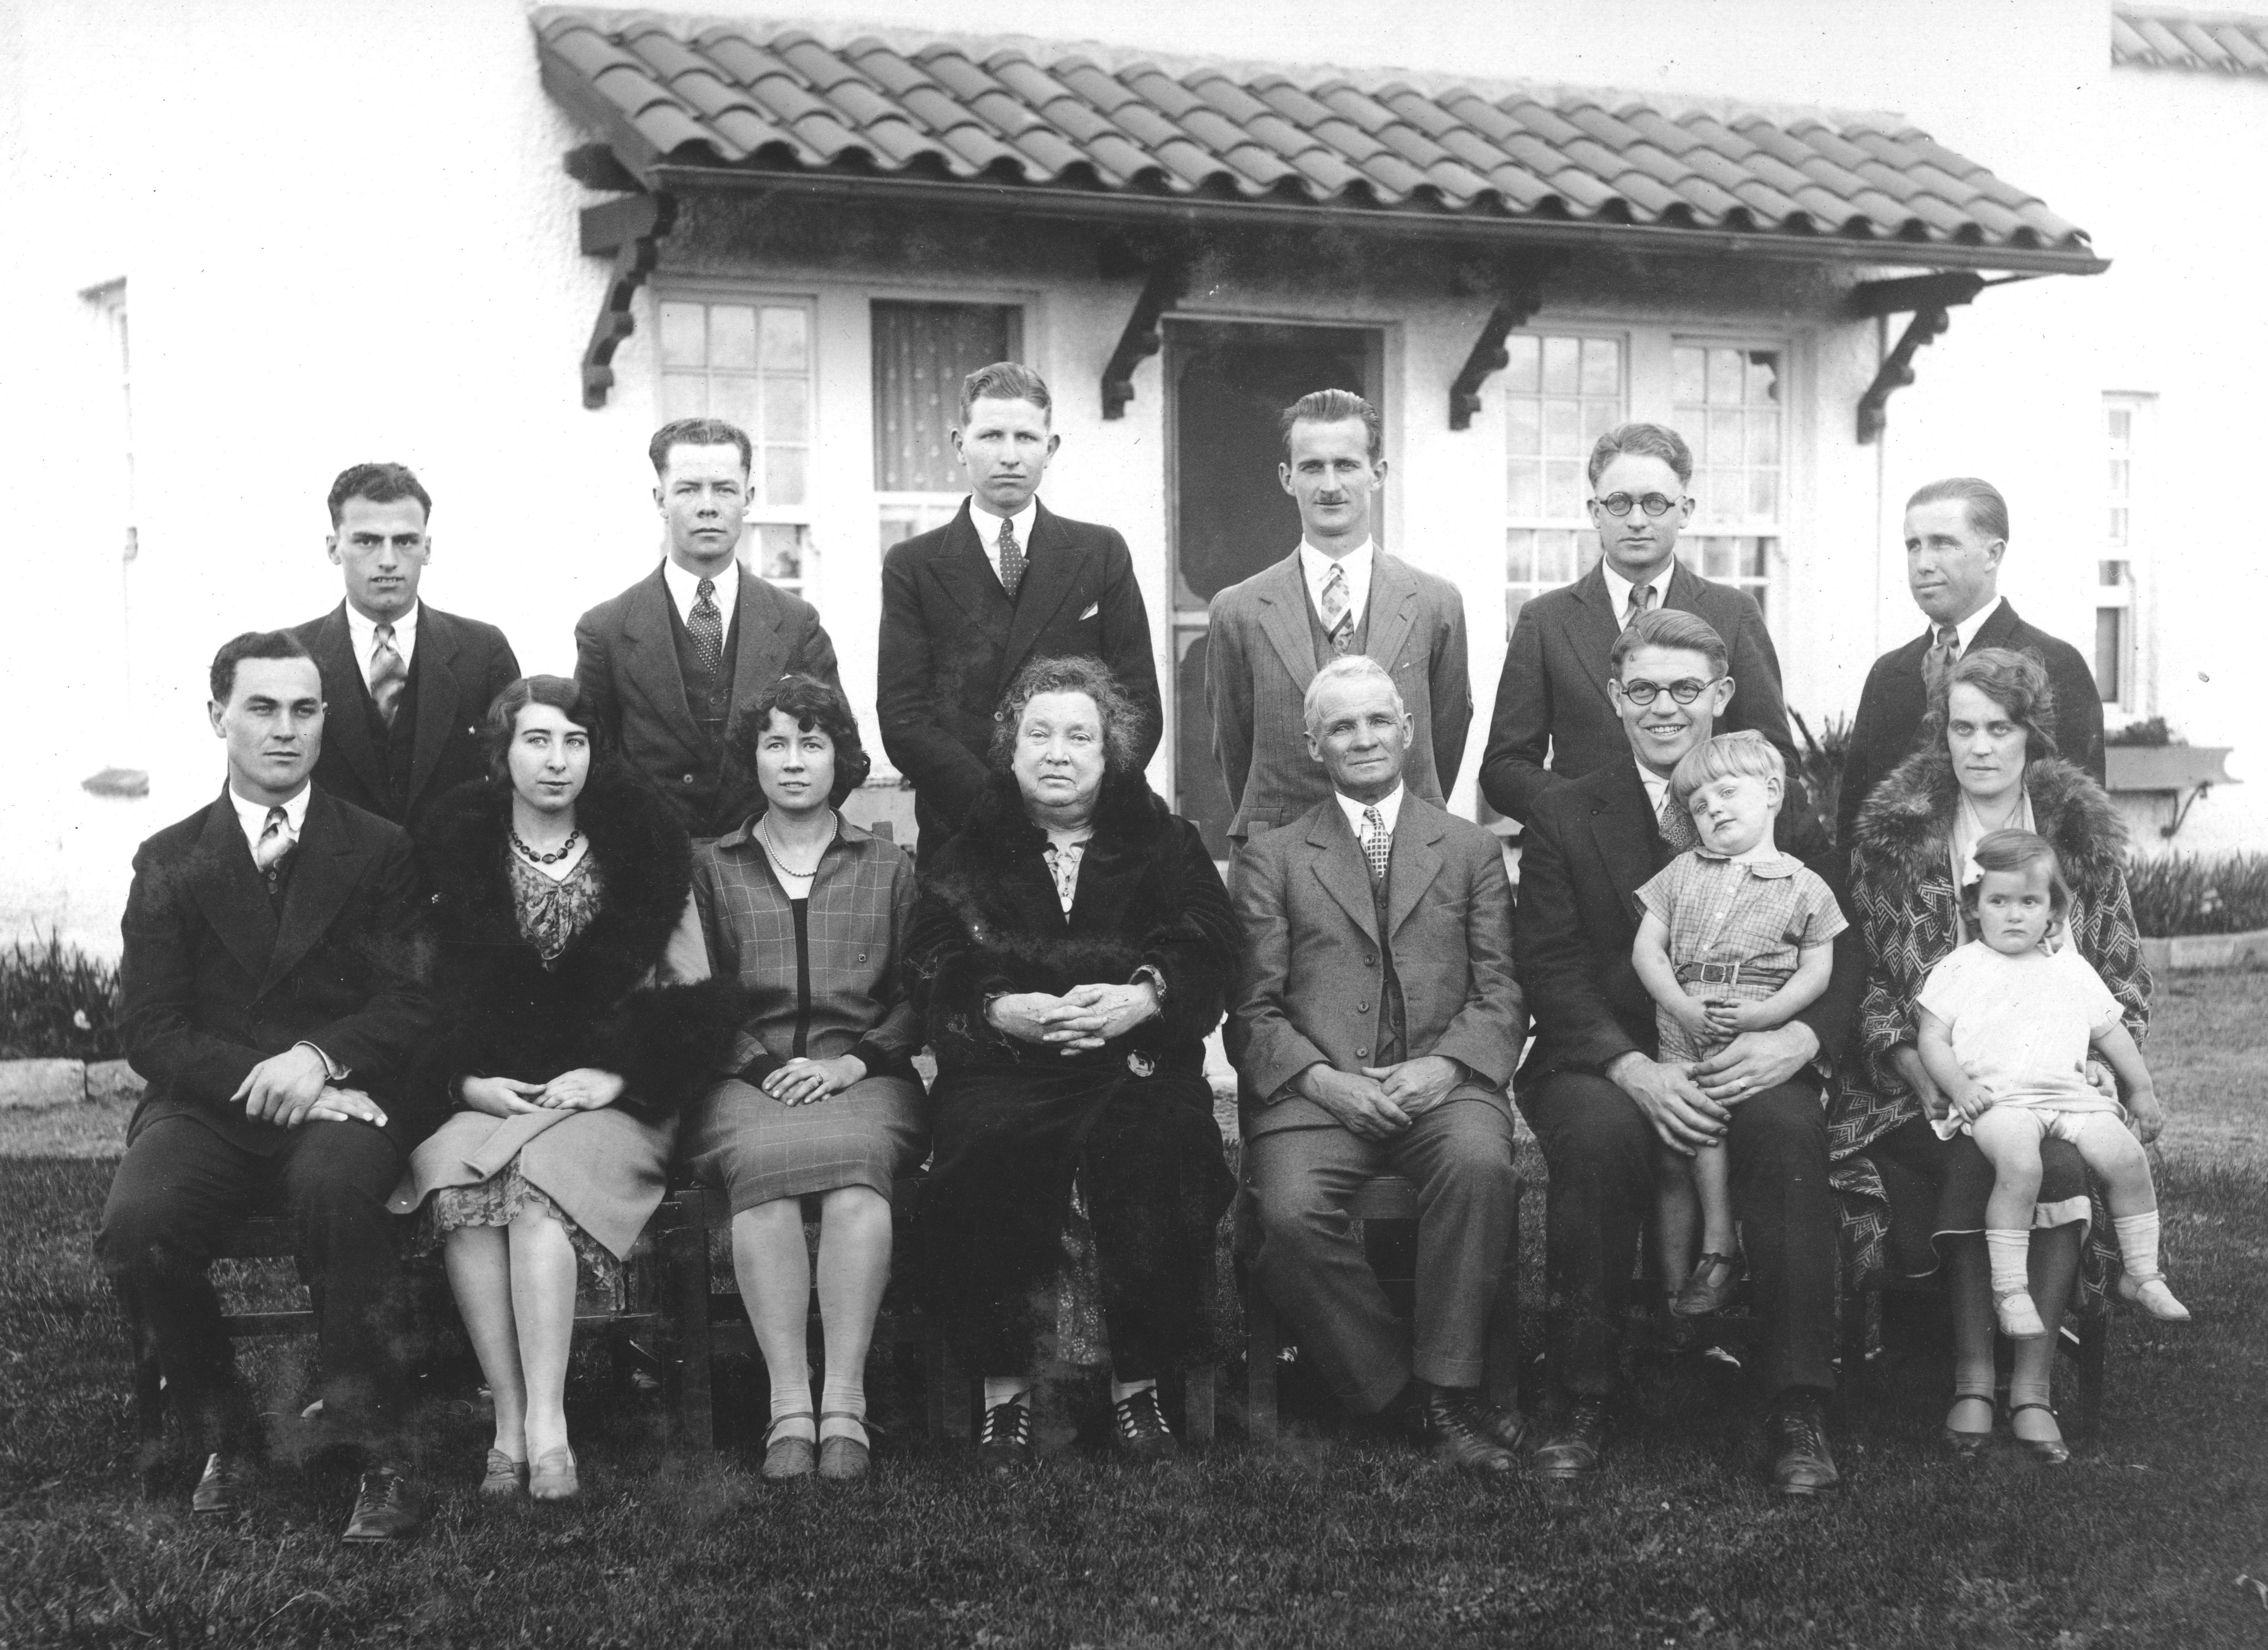 President Ariel Smith Ballif at the Maori Agricultural College with N.Z. Mission Staff 1929